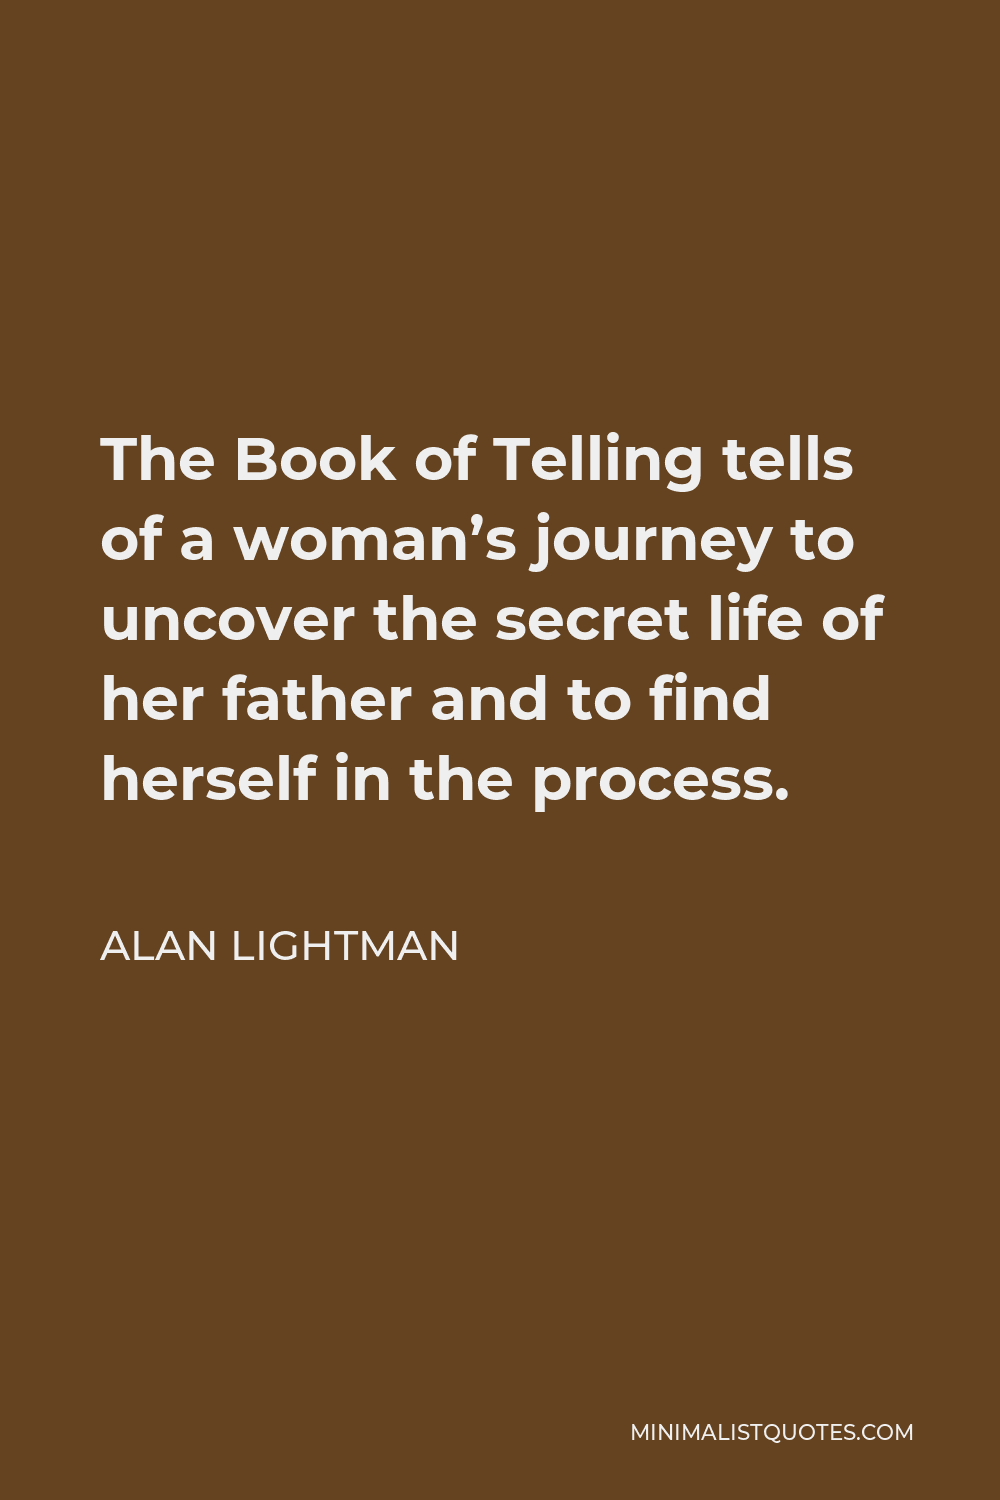 Alan Lightman Quote - The Book of Telling tells of a woman’s journey to uncover the secret life of her father and to find herself in the process.